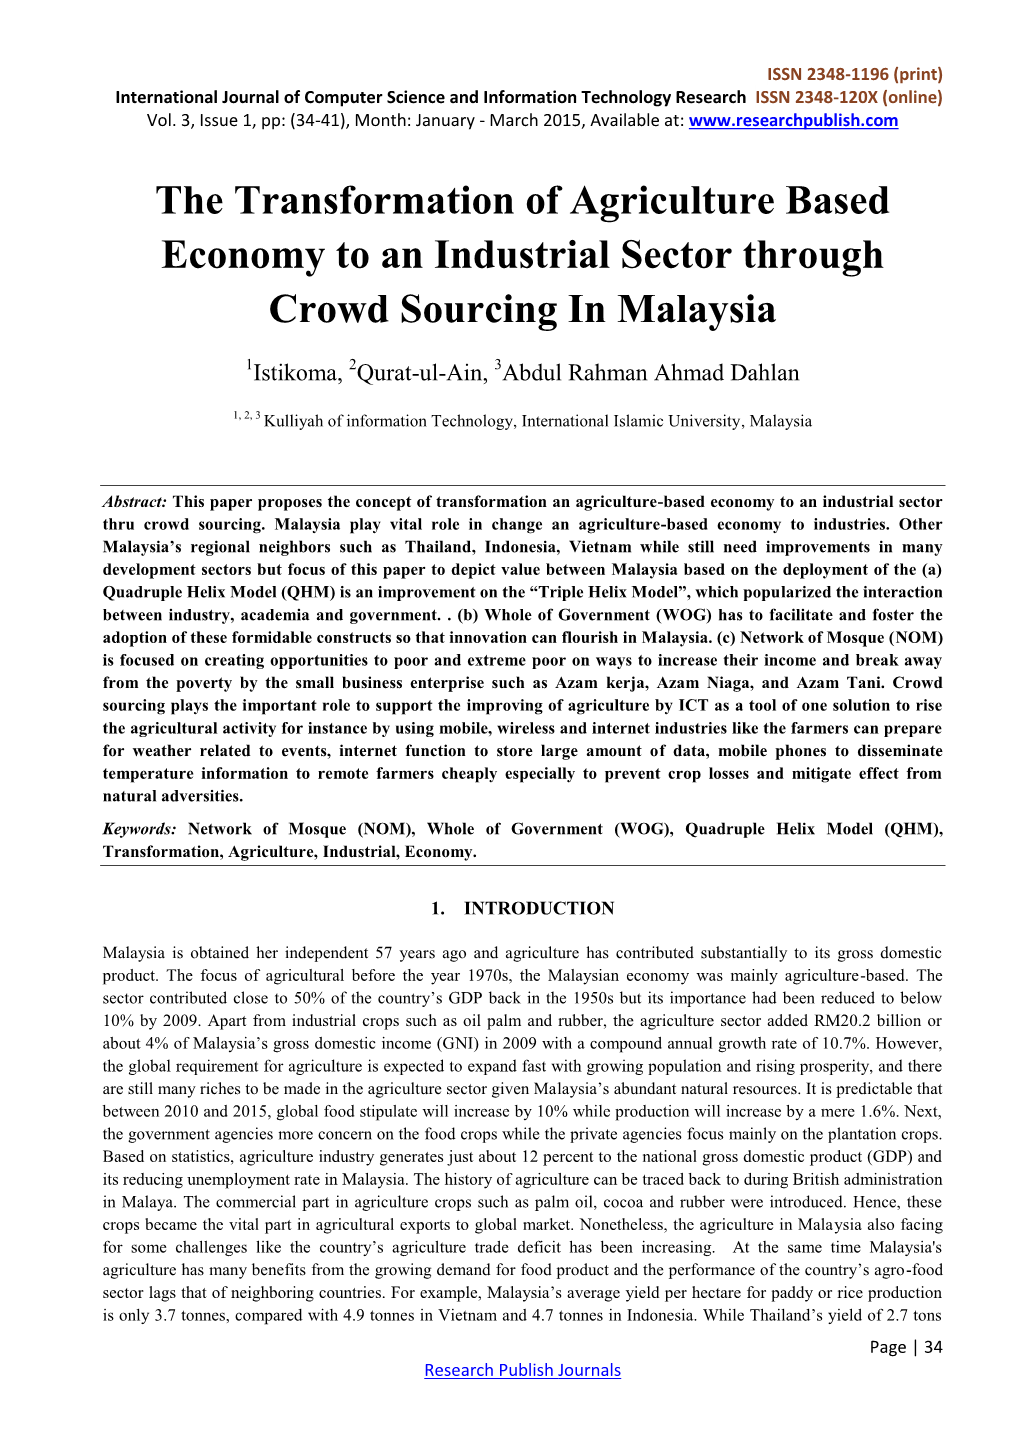 The Transformation of Agriculture Based Economy to an Industrial Sector Through Crowd Sourcing in Malaysia